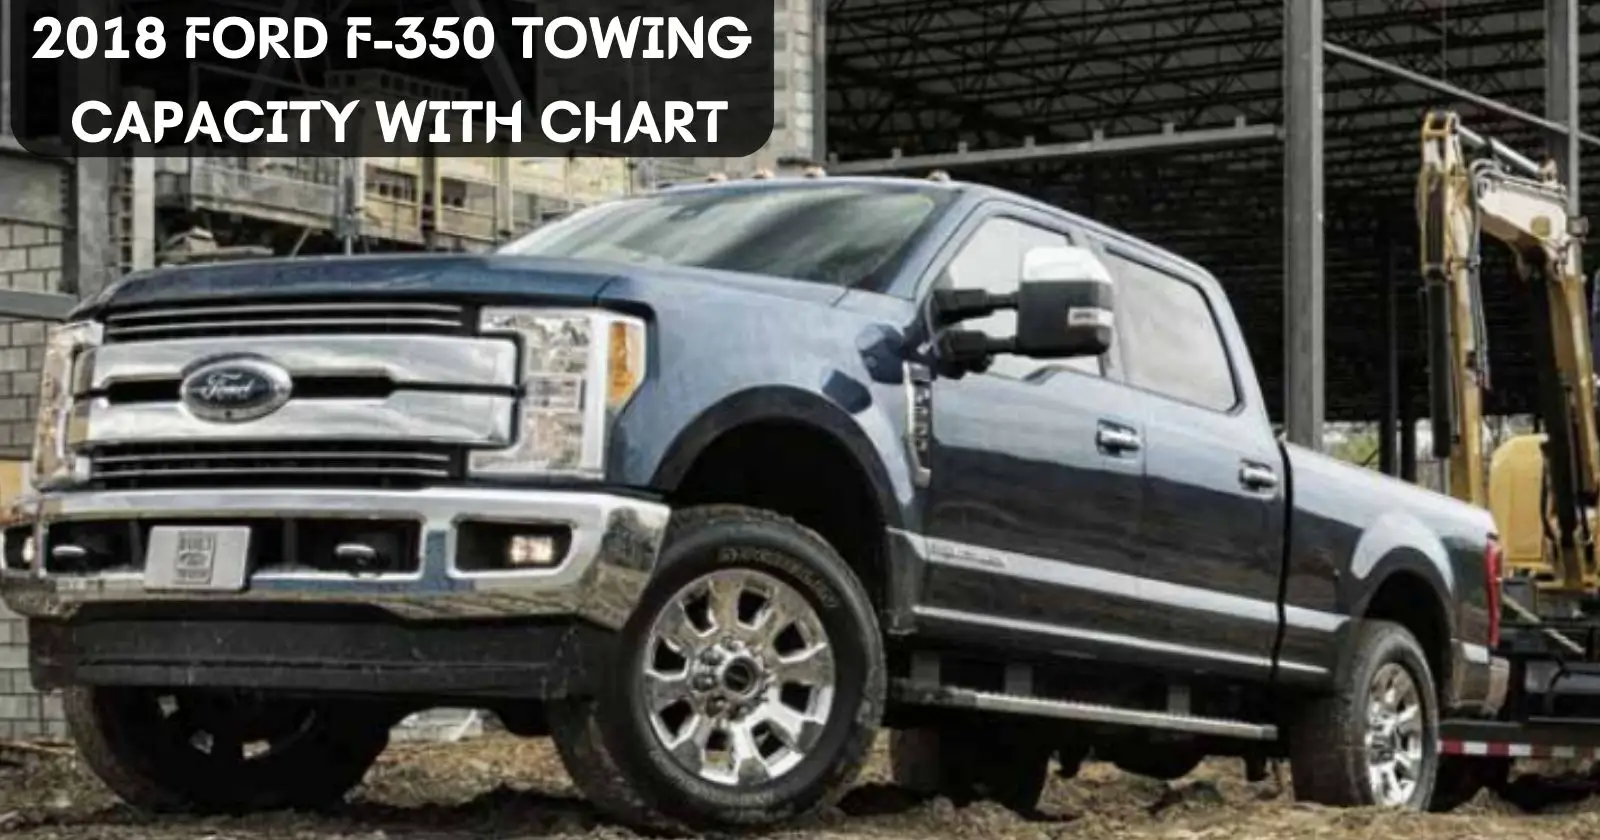 2018-ford-f-350-towing-capacity-thecartowing